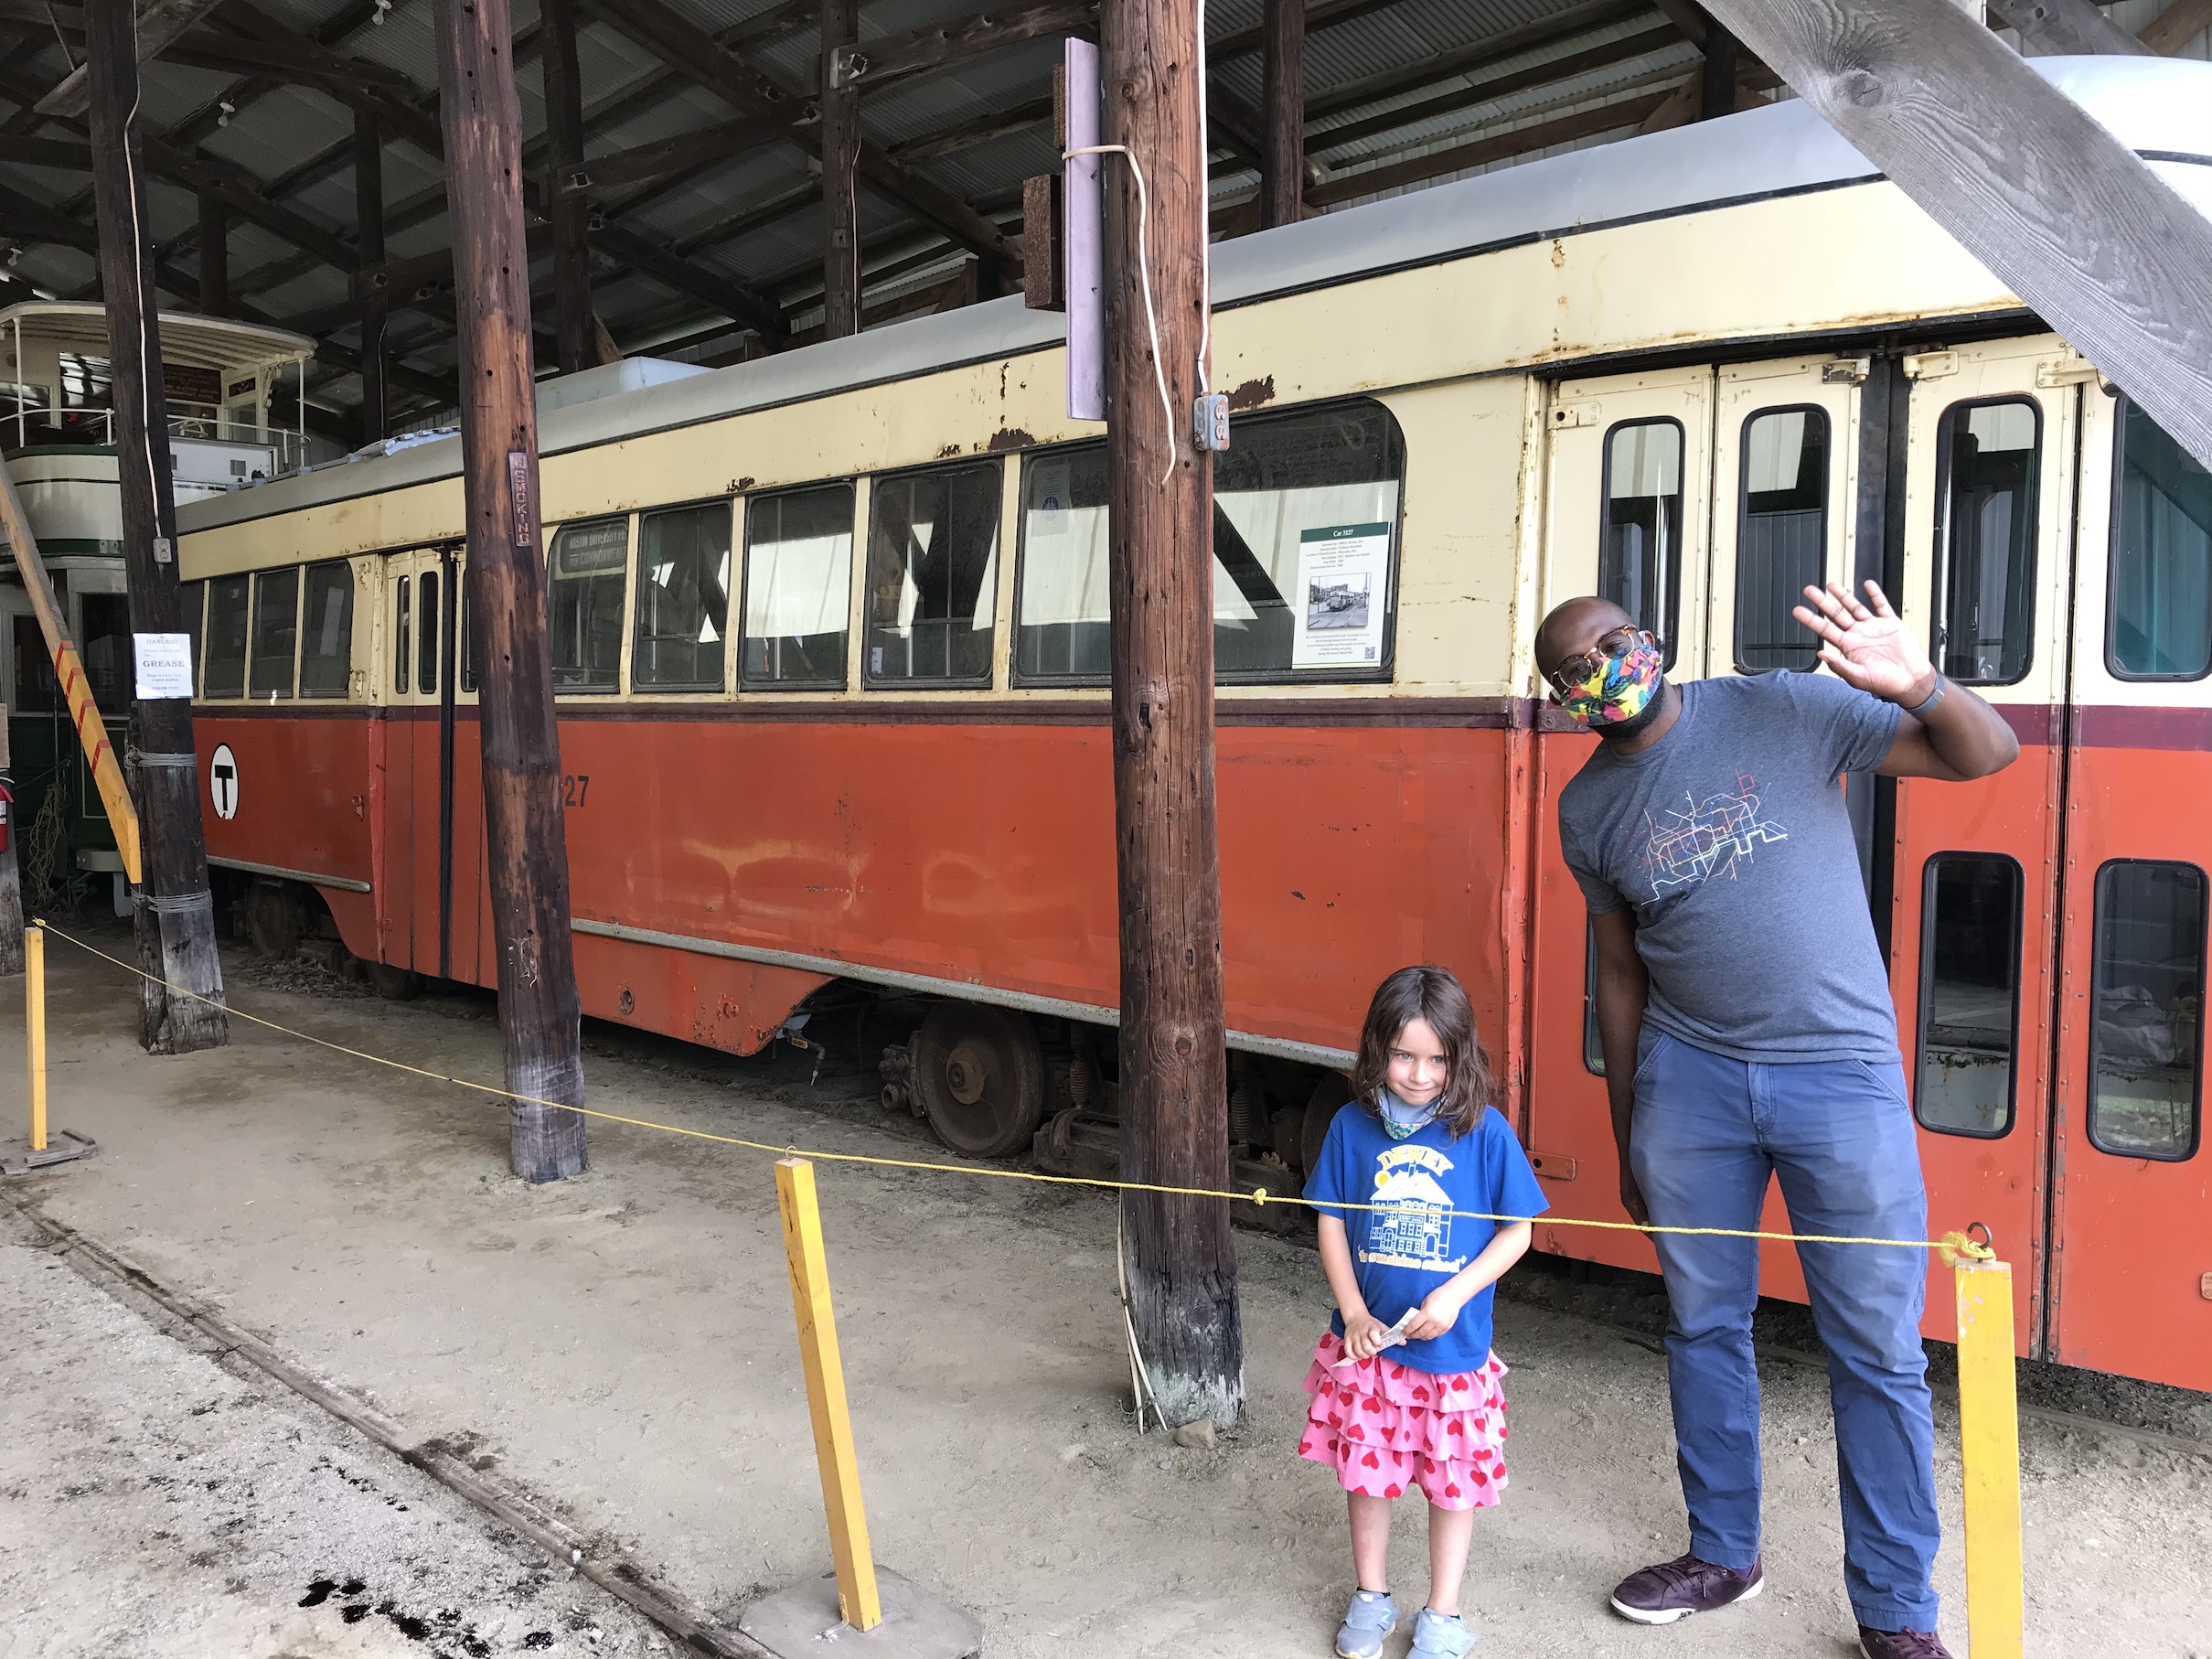 TransitMatters executive director Jarred Johnson, with the author's nonplussed 6 year-old, wave in front of Car 3127, a 1946 Pullman streetcar